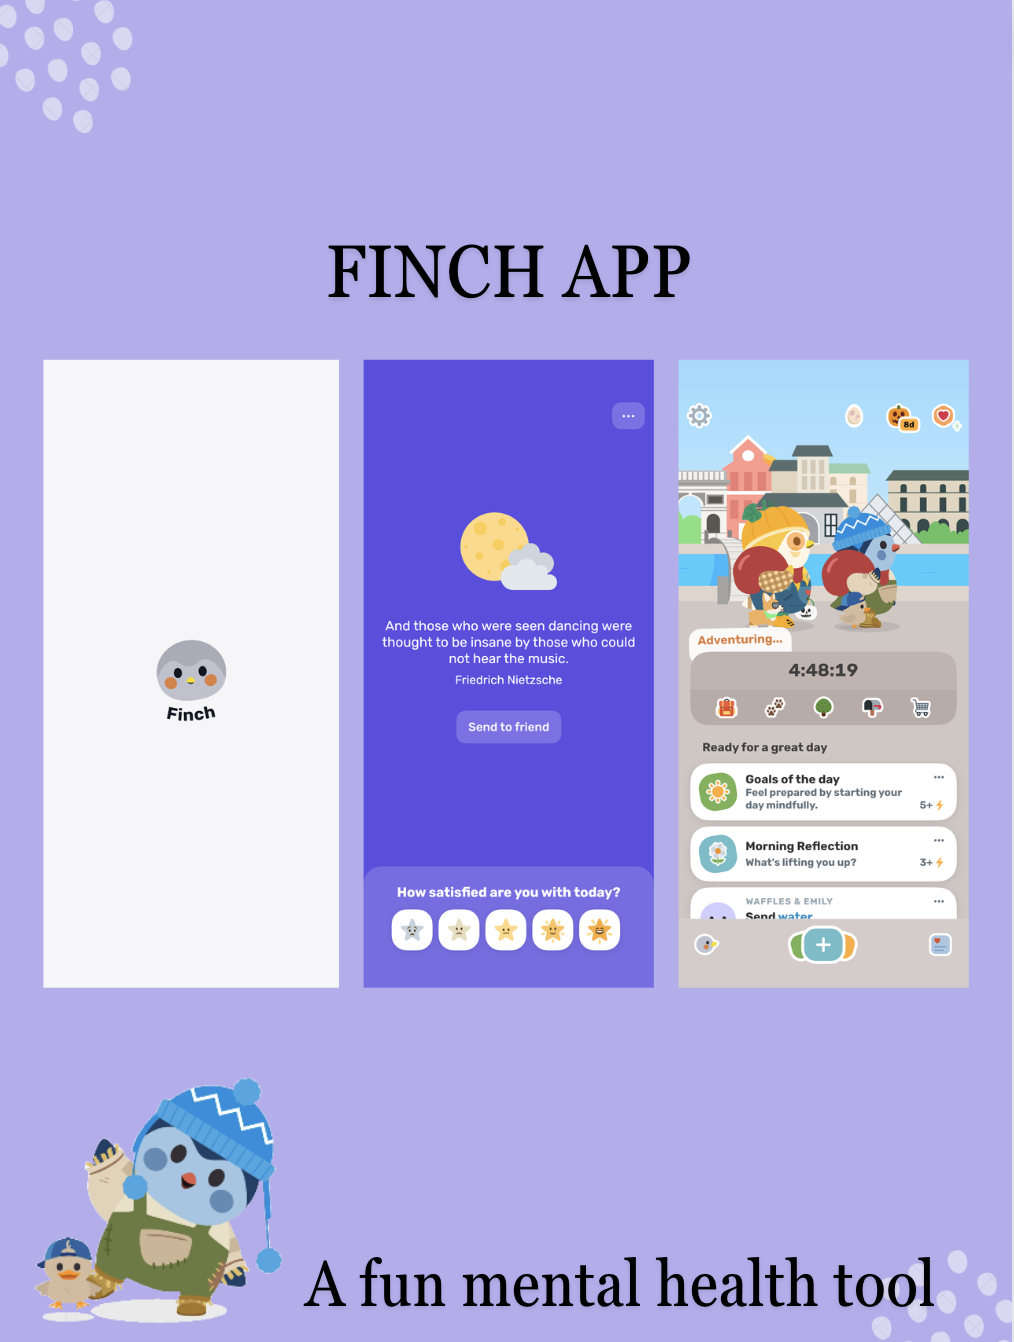 The finch app is a digital mental health tool that gamifies the self-care process
as shown in the digital collage.